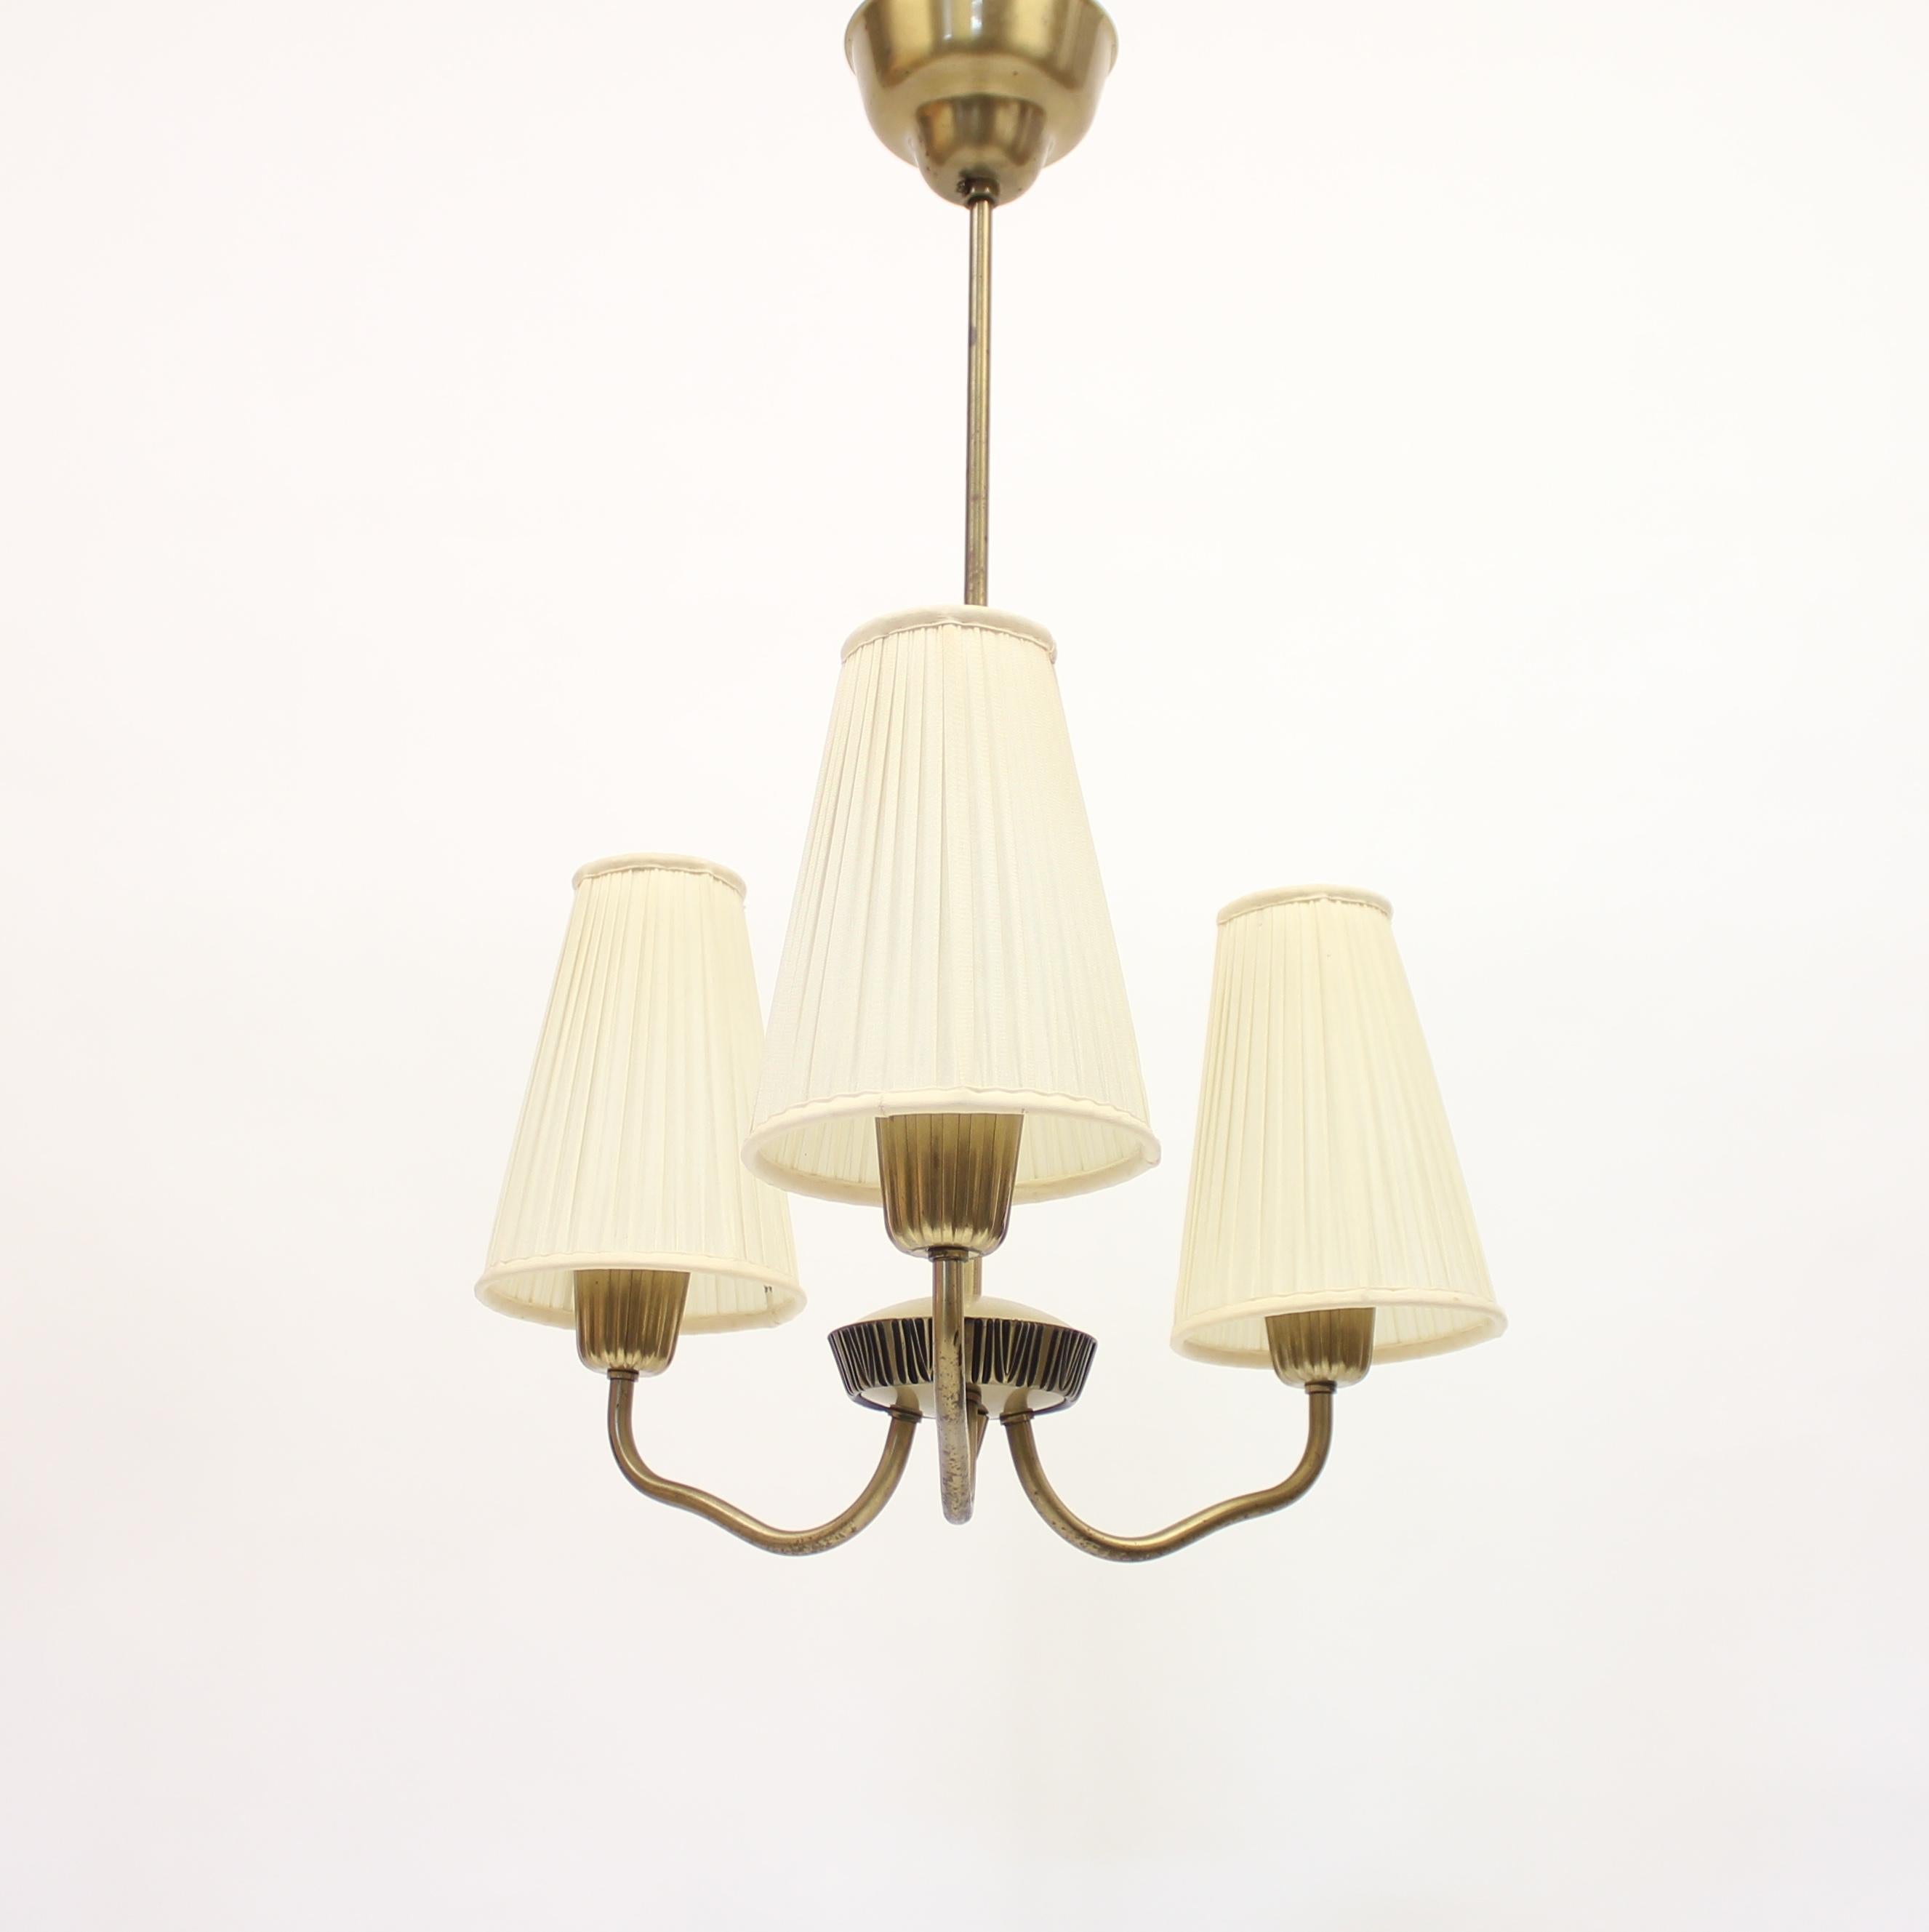 3-Light ceiling lamp manufactured by Swedish company ASEA in the 1950s. The design is attributed to Sonja Katzin. Restored electric components, original pleated shades in off white. Very good untouched vintage condition with light ware consistent